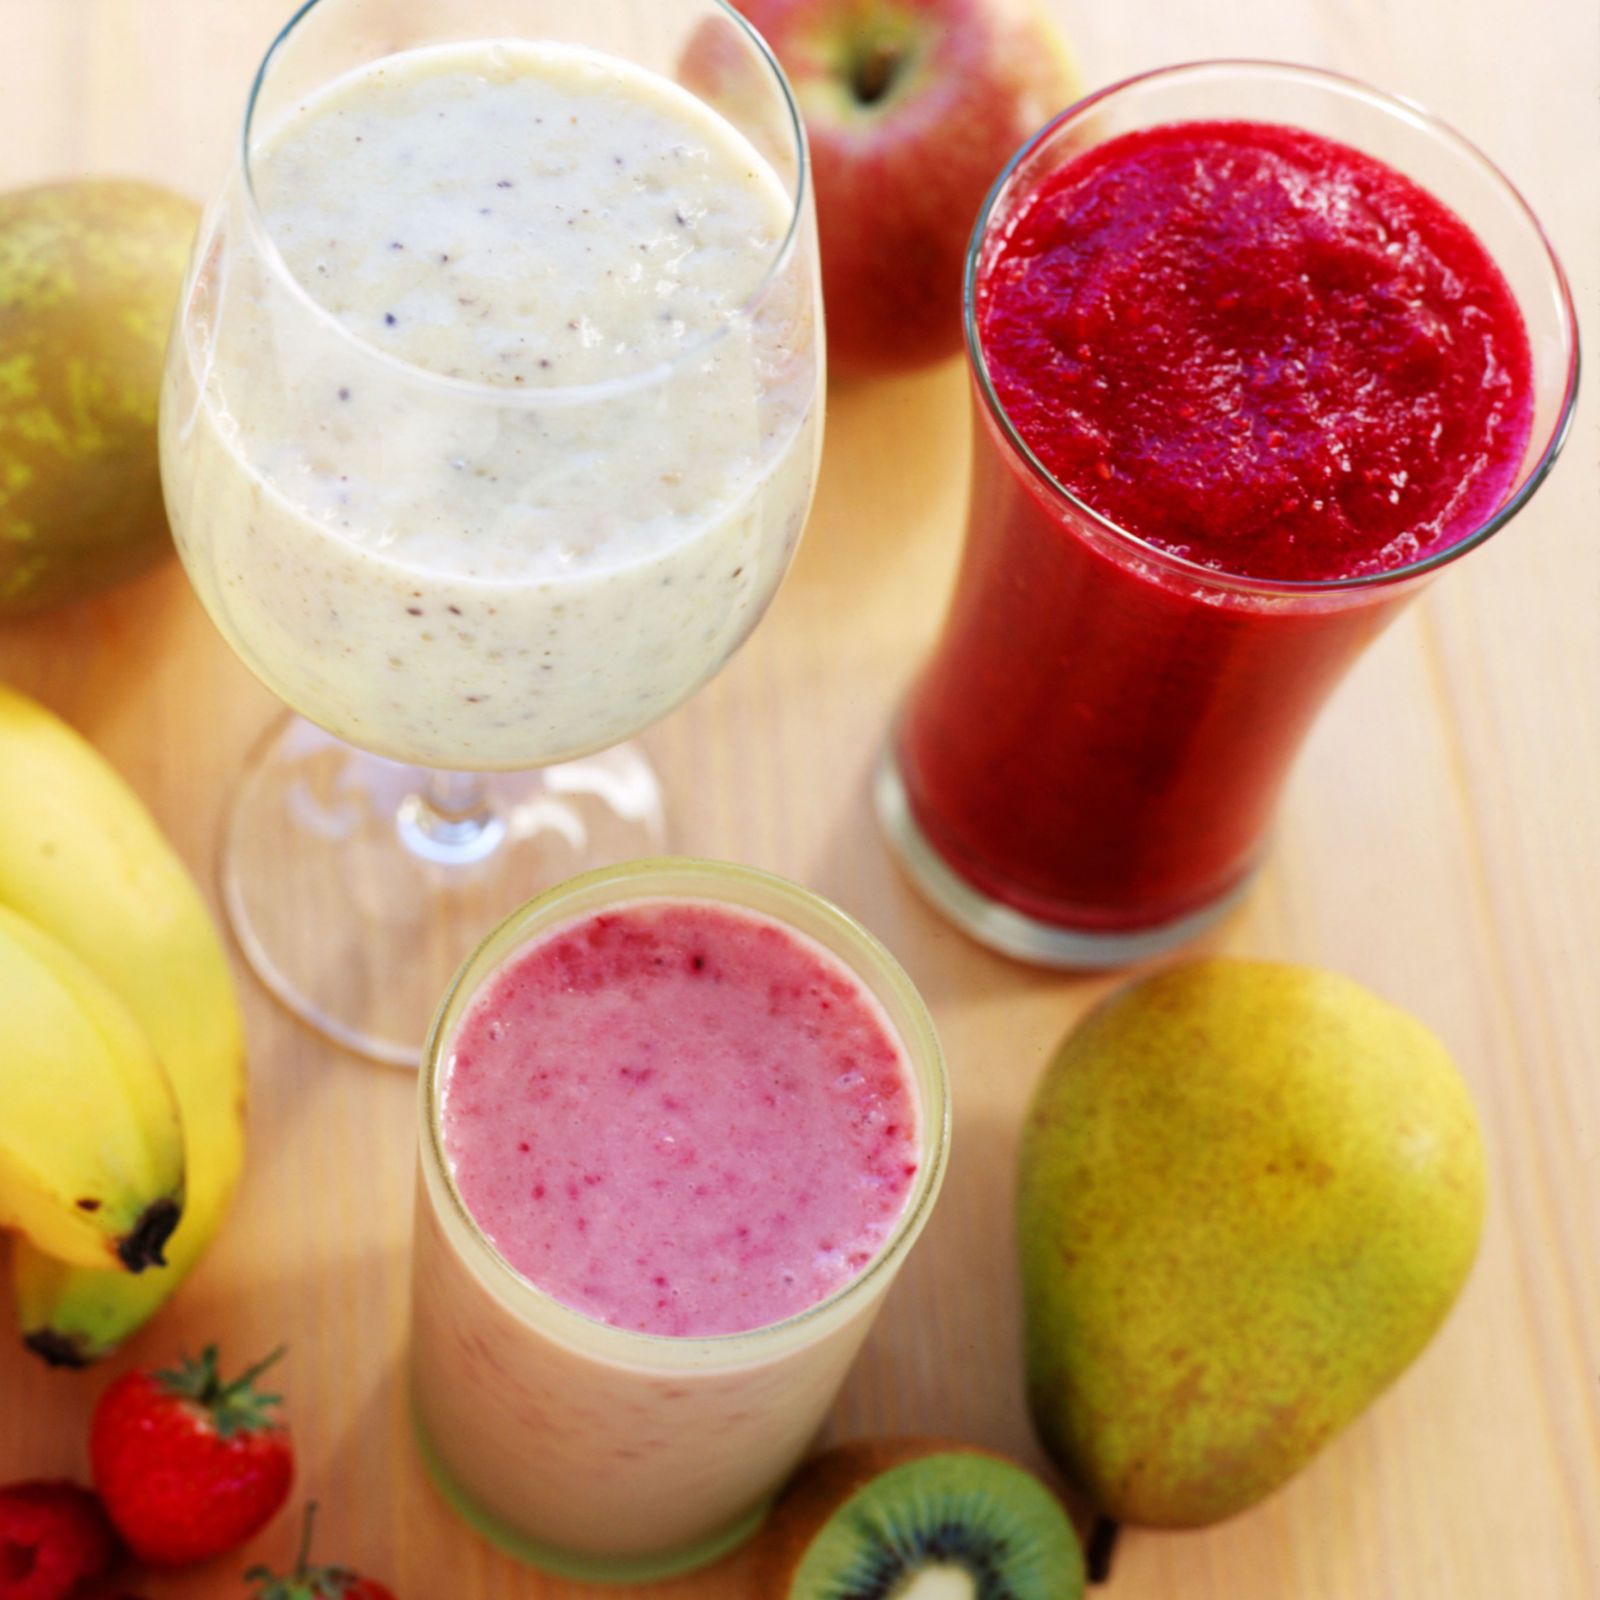 4 Better, Slimmer Smoothies You Can Make At Home